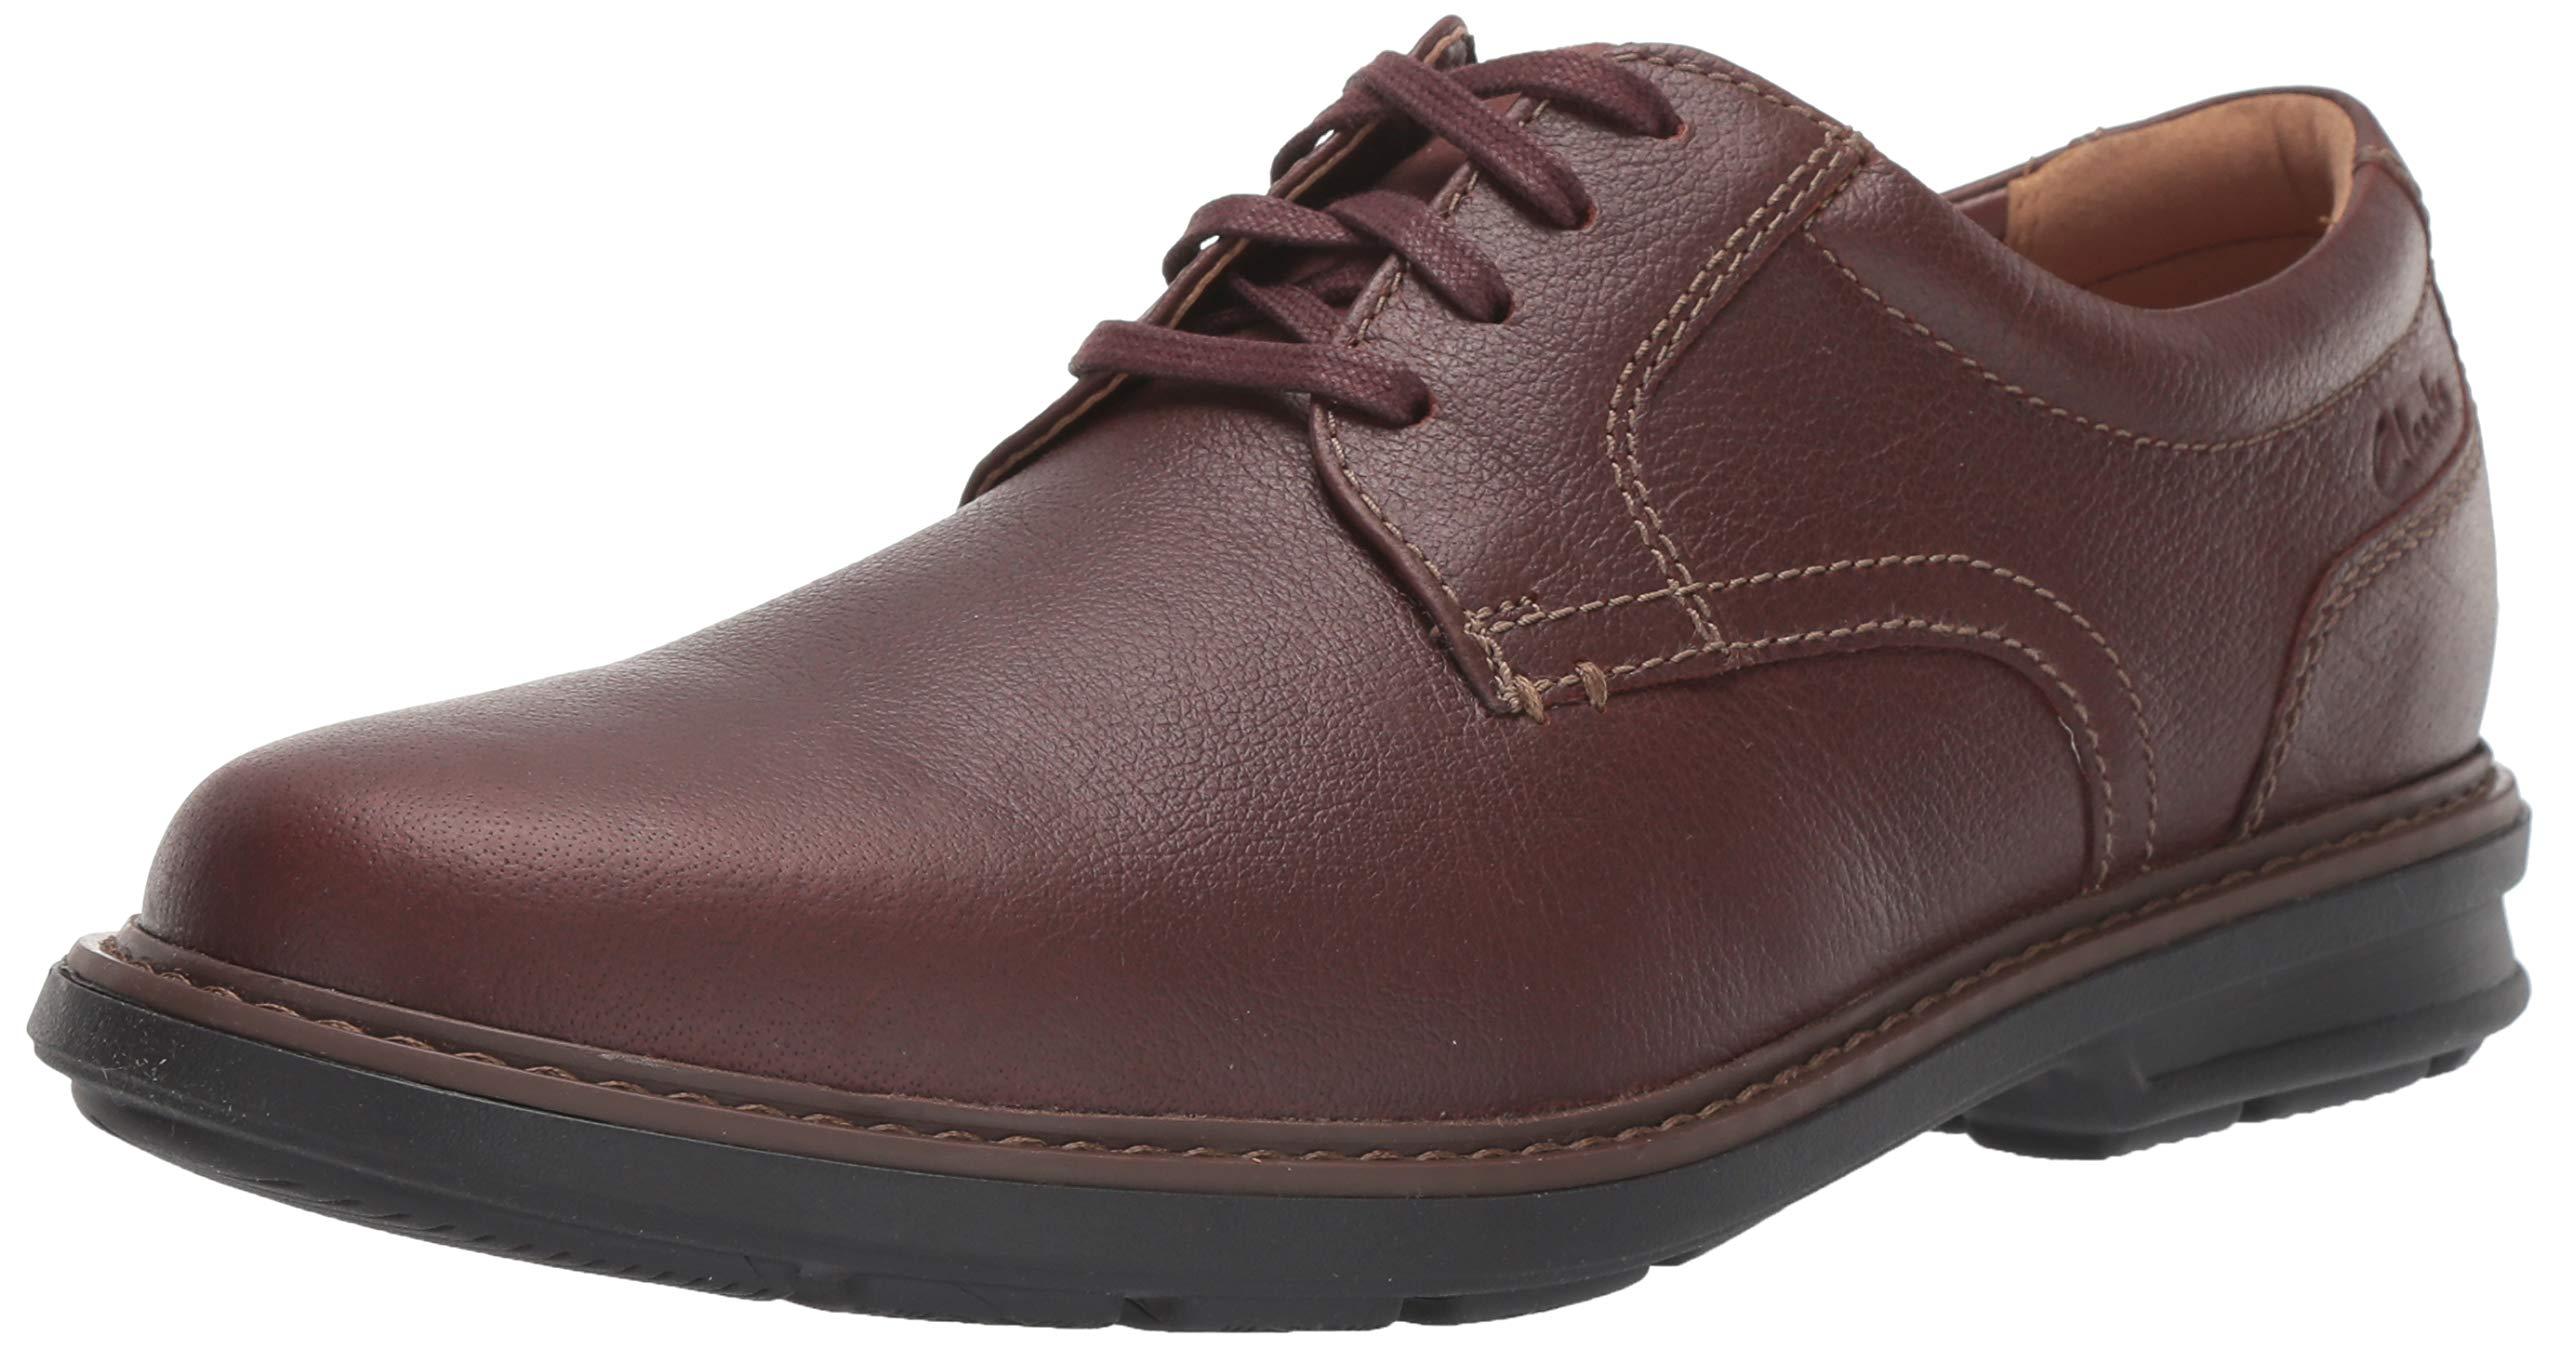 Clarks Leather Rendell Plain Oxford in Mahogany Leather (Brown) for Men ...